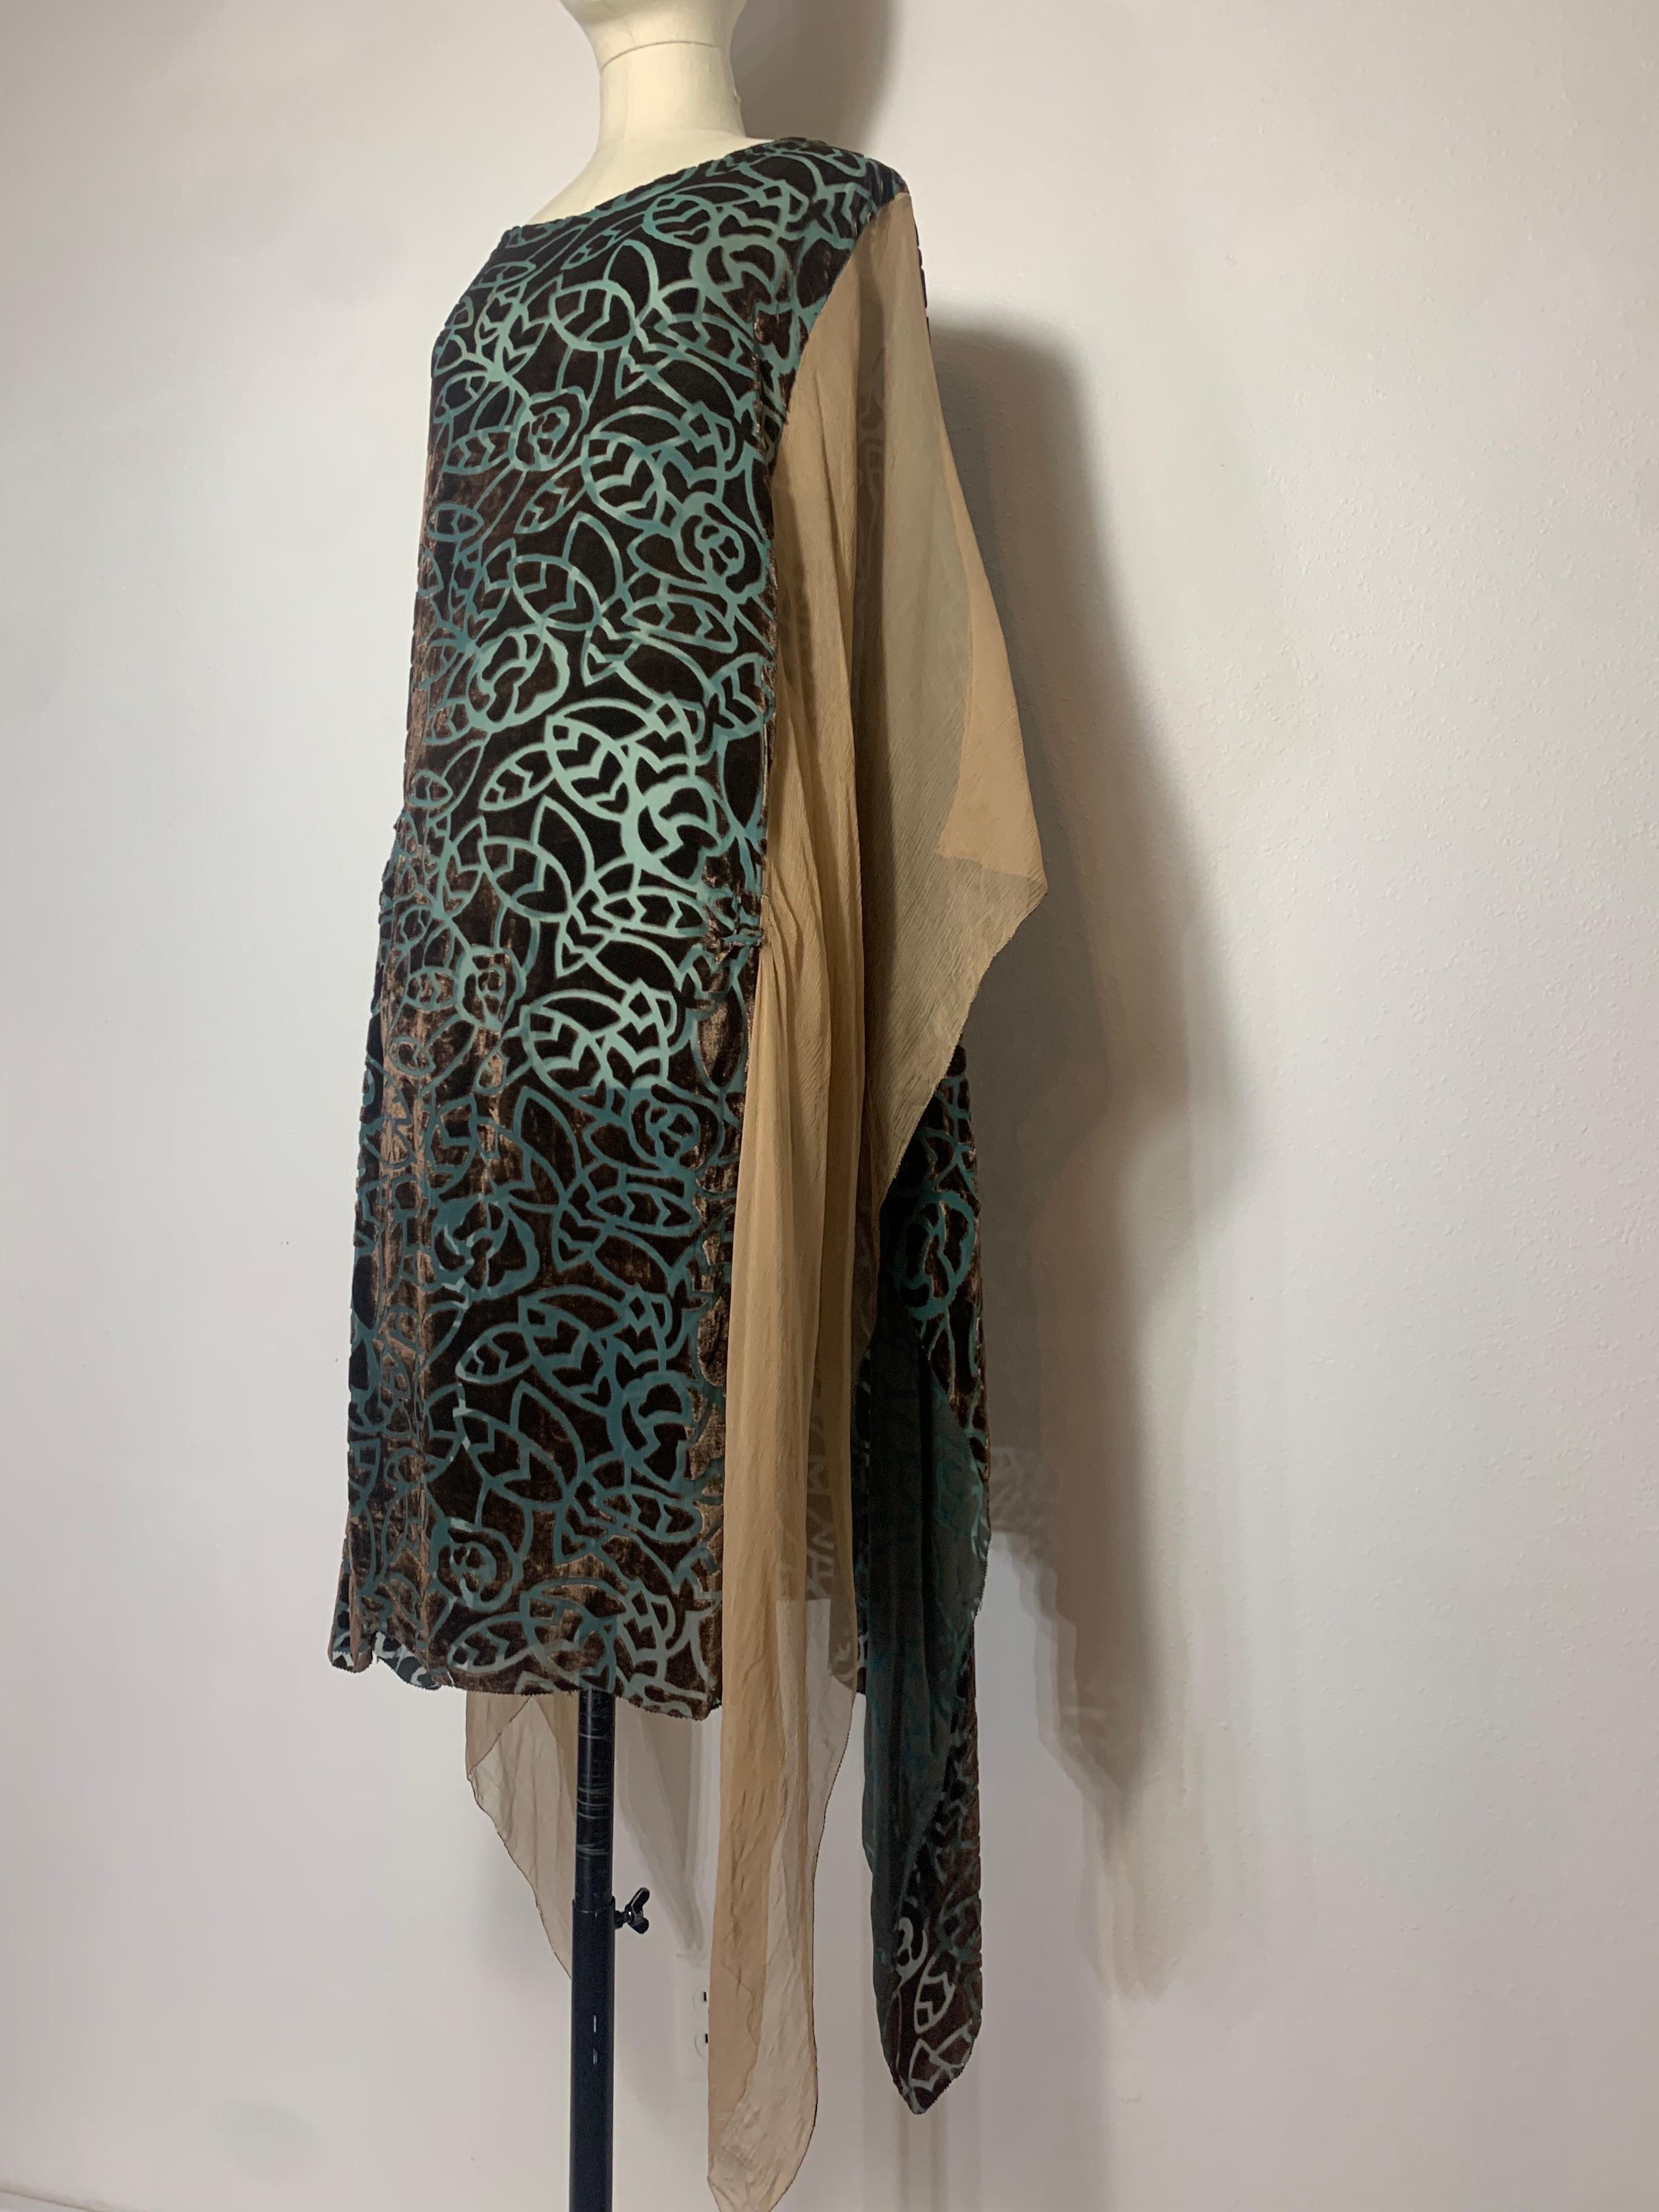 1920s Patina Green & Taupe Devore Velvet Art Deco Tunic w Stylized Leaf Pattern For Sale 14